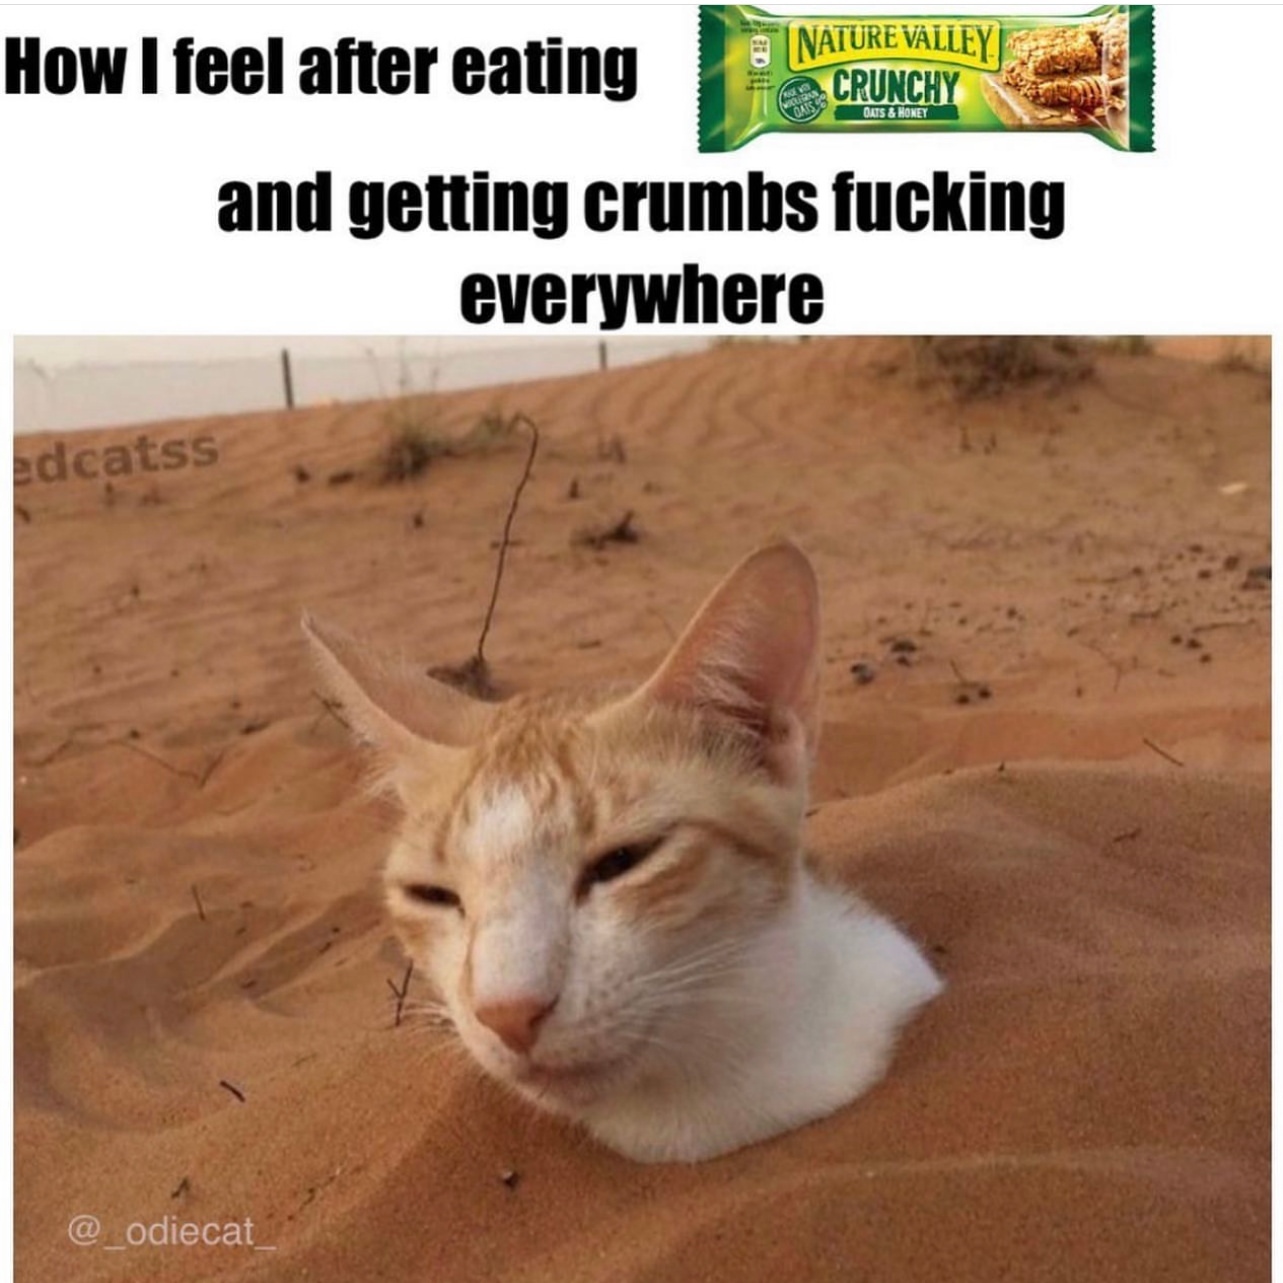 How I feel after eating and getting crumbs fucking everywhere.